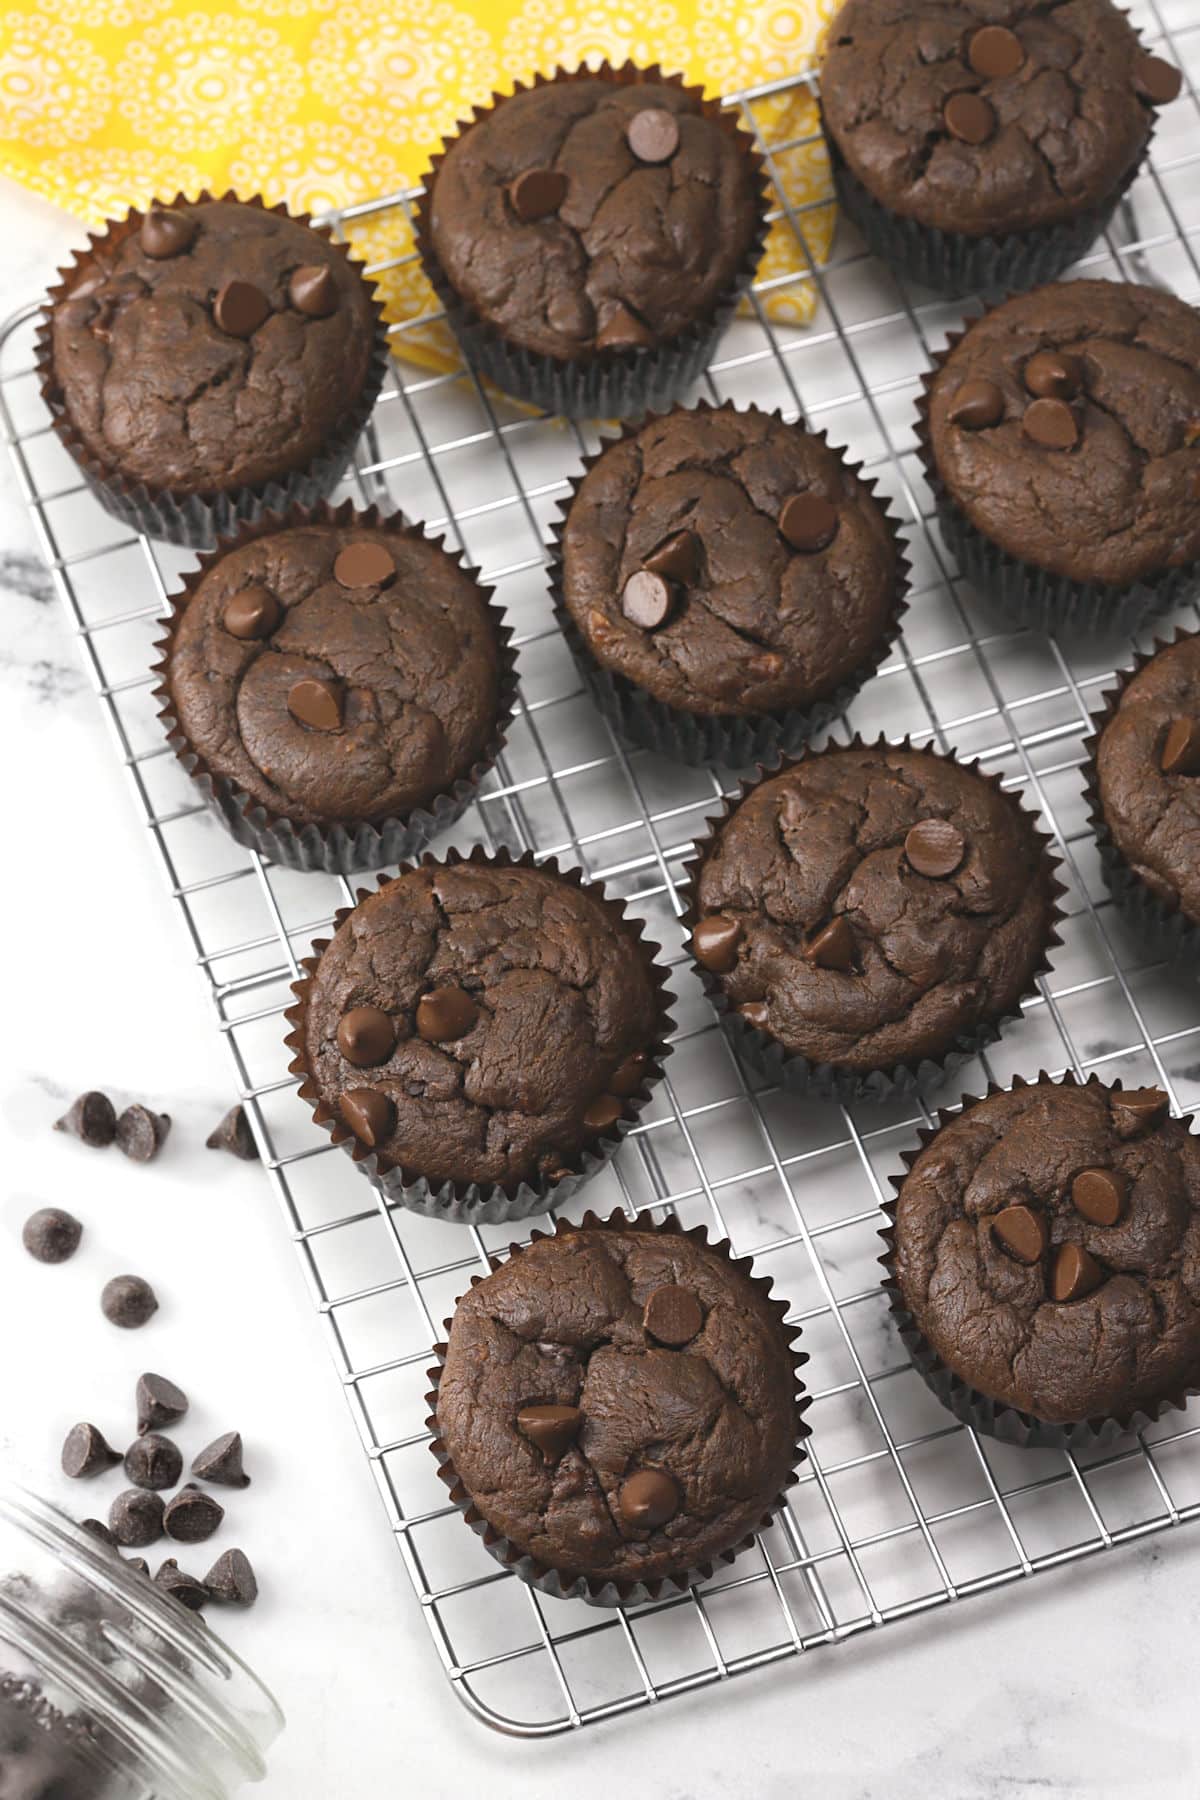 Chocolate muffins on a metal cooling rack.